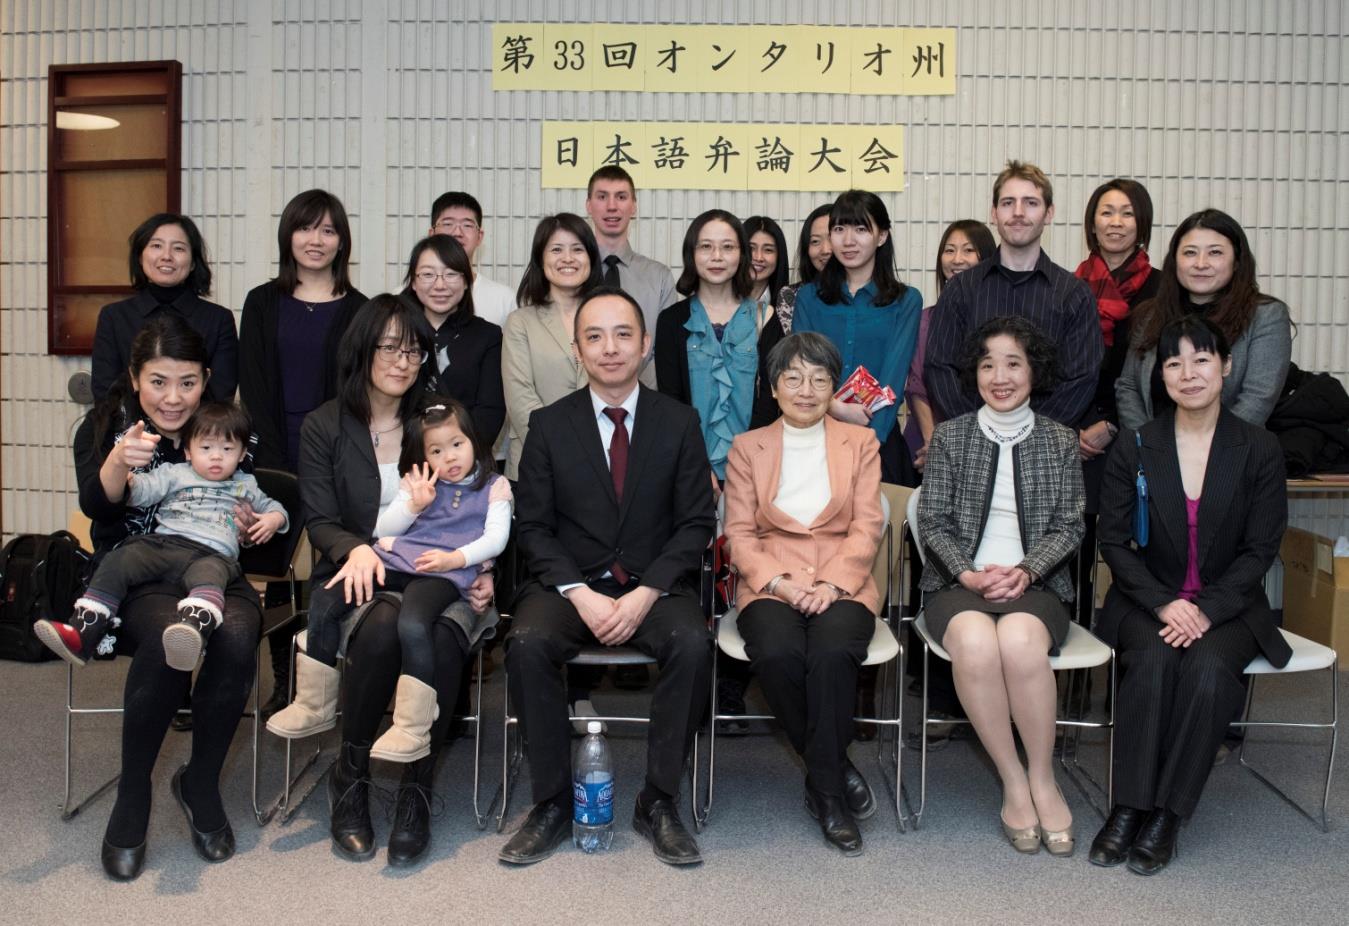 The 33 rd Ontario Japanese Speech Contest A Collection of the Award Winning Speeches ( 第 33 回 オンタリオ 州 日 本 語 弁 論 大 会 入 賞 者 スピーチ 集 ) The Organizing Committee for the Ontario Japanese Speech Contest